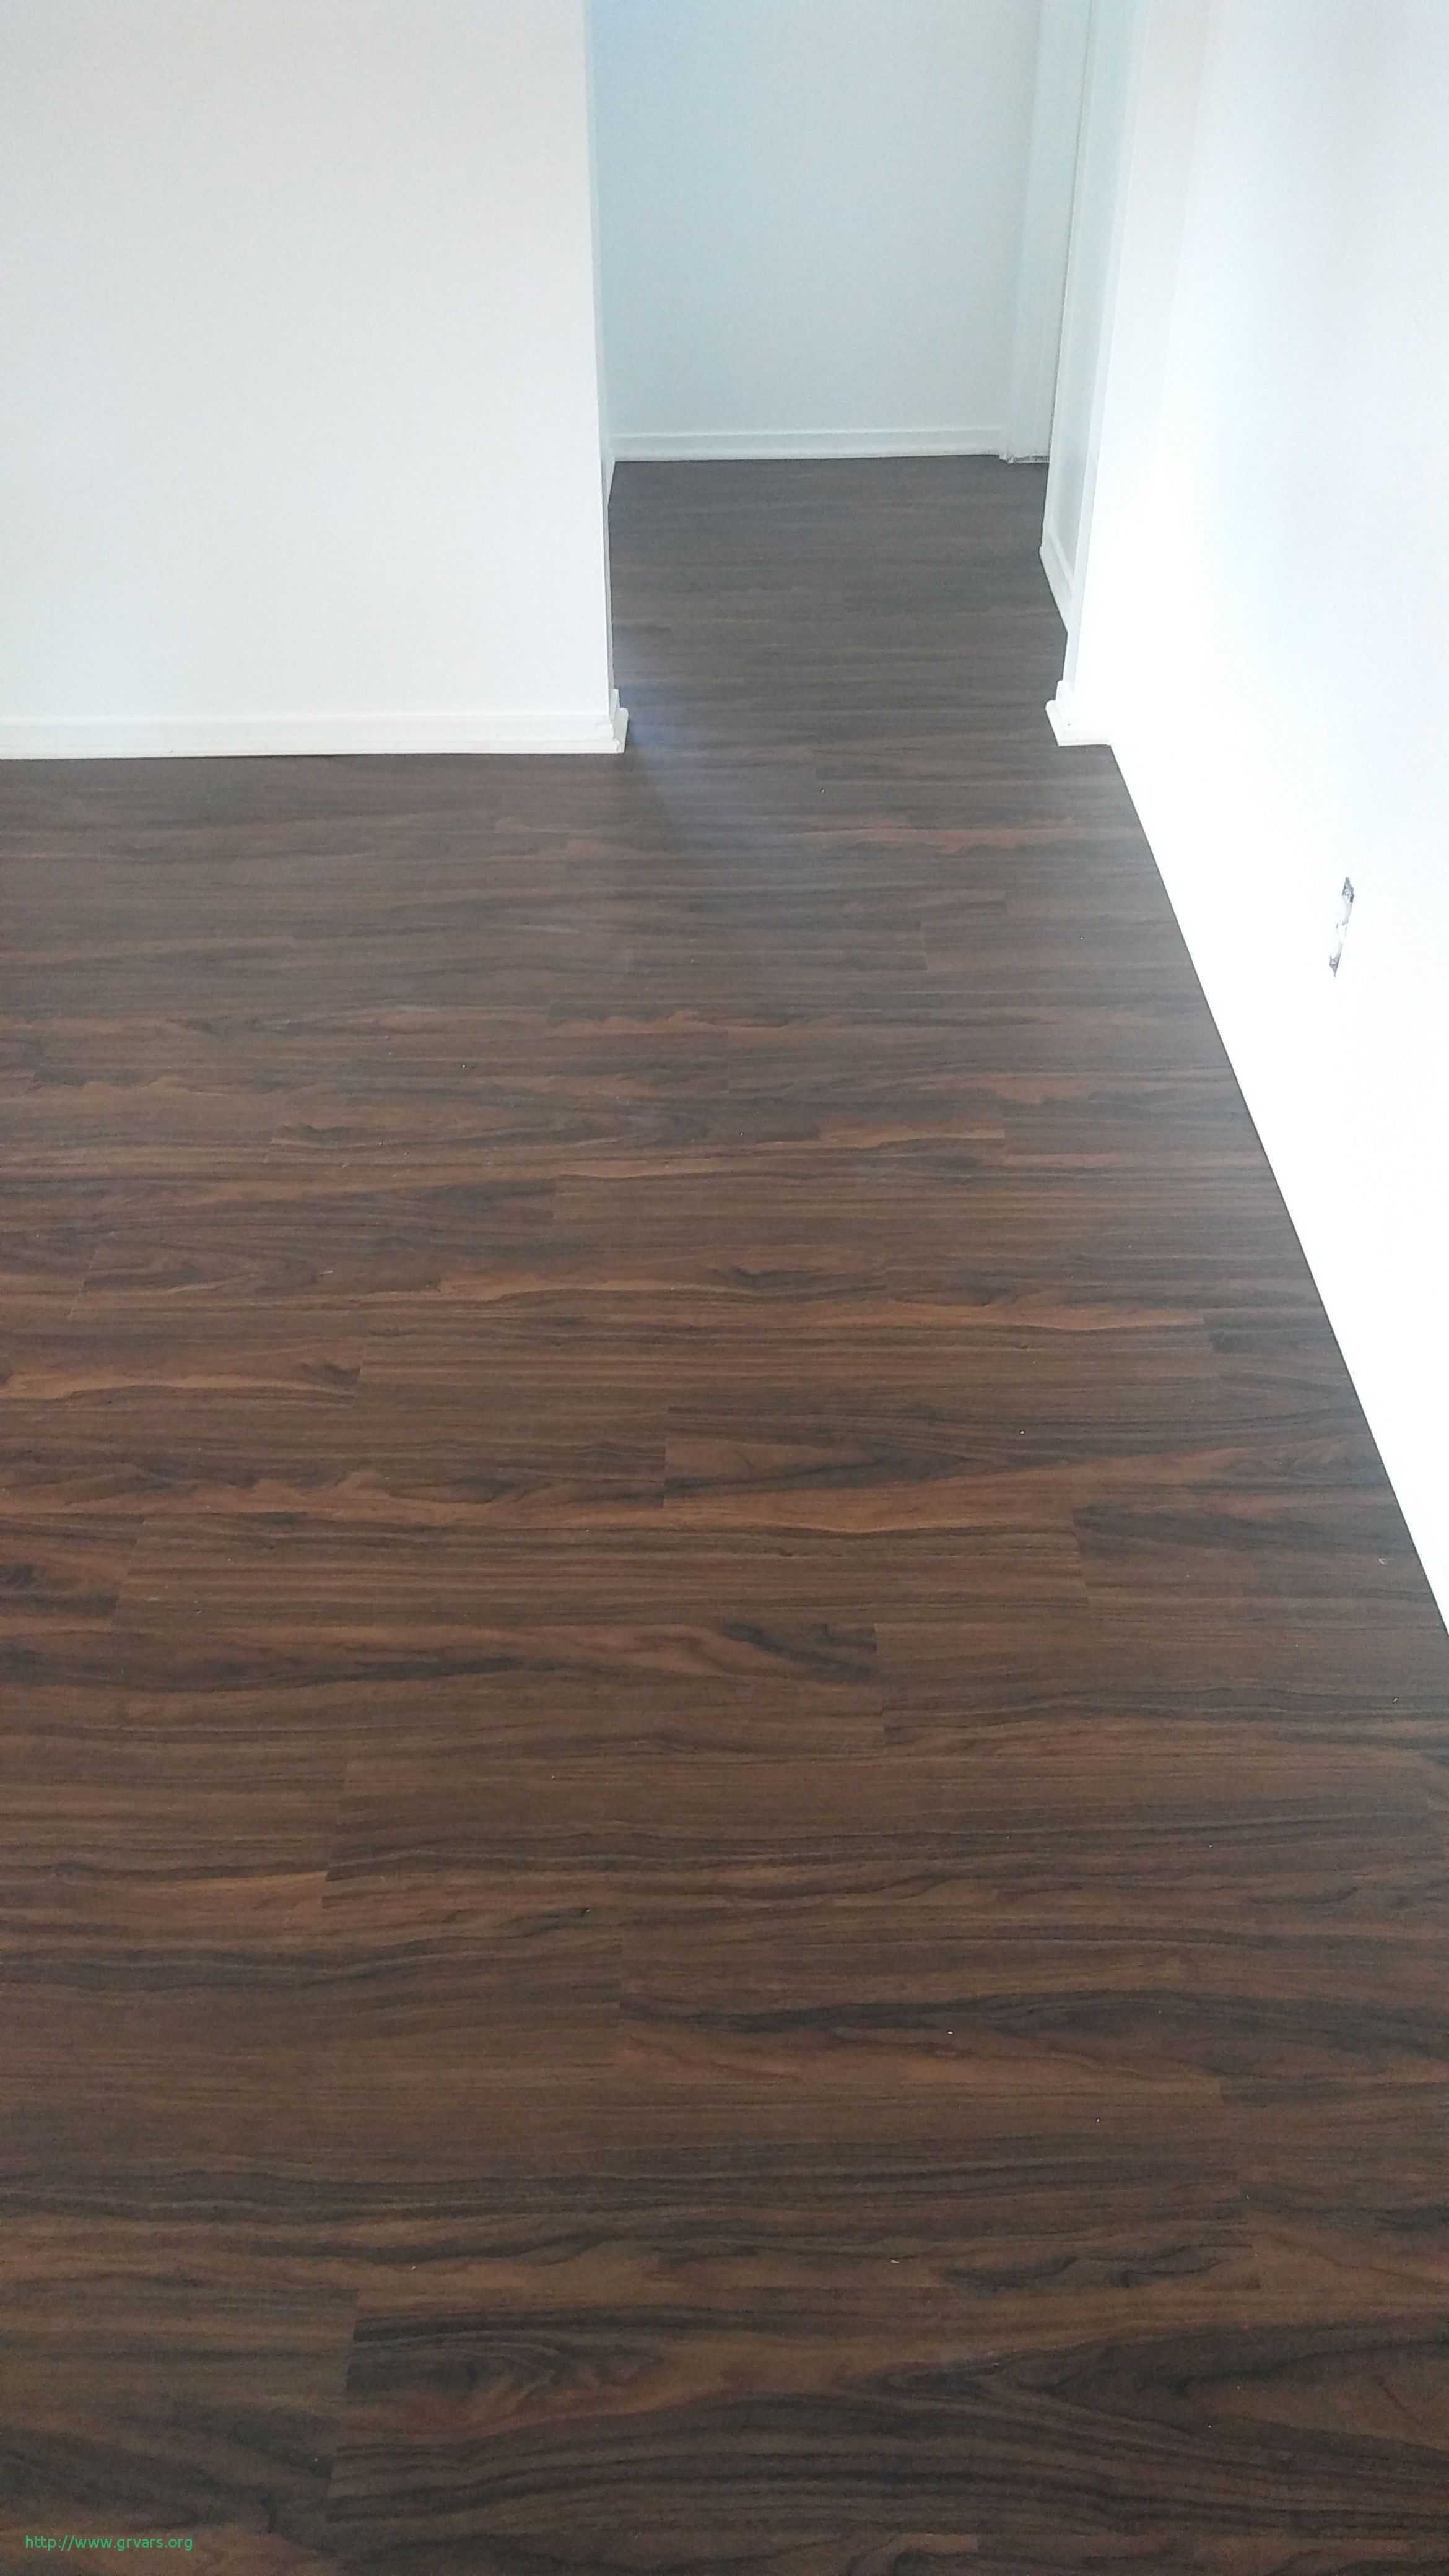 Hardwood Flooring Depot Irvine Of 19 Impressionnant orange County Flooring Stores Ideas Blog In orange County Flooring Stores Beau Check Out This Vinyl Plank Installation In the Color Baltimore Call